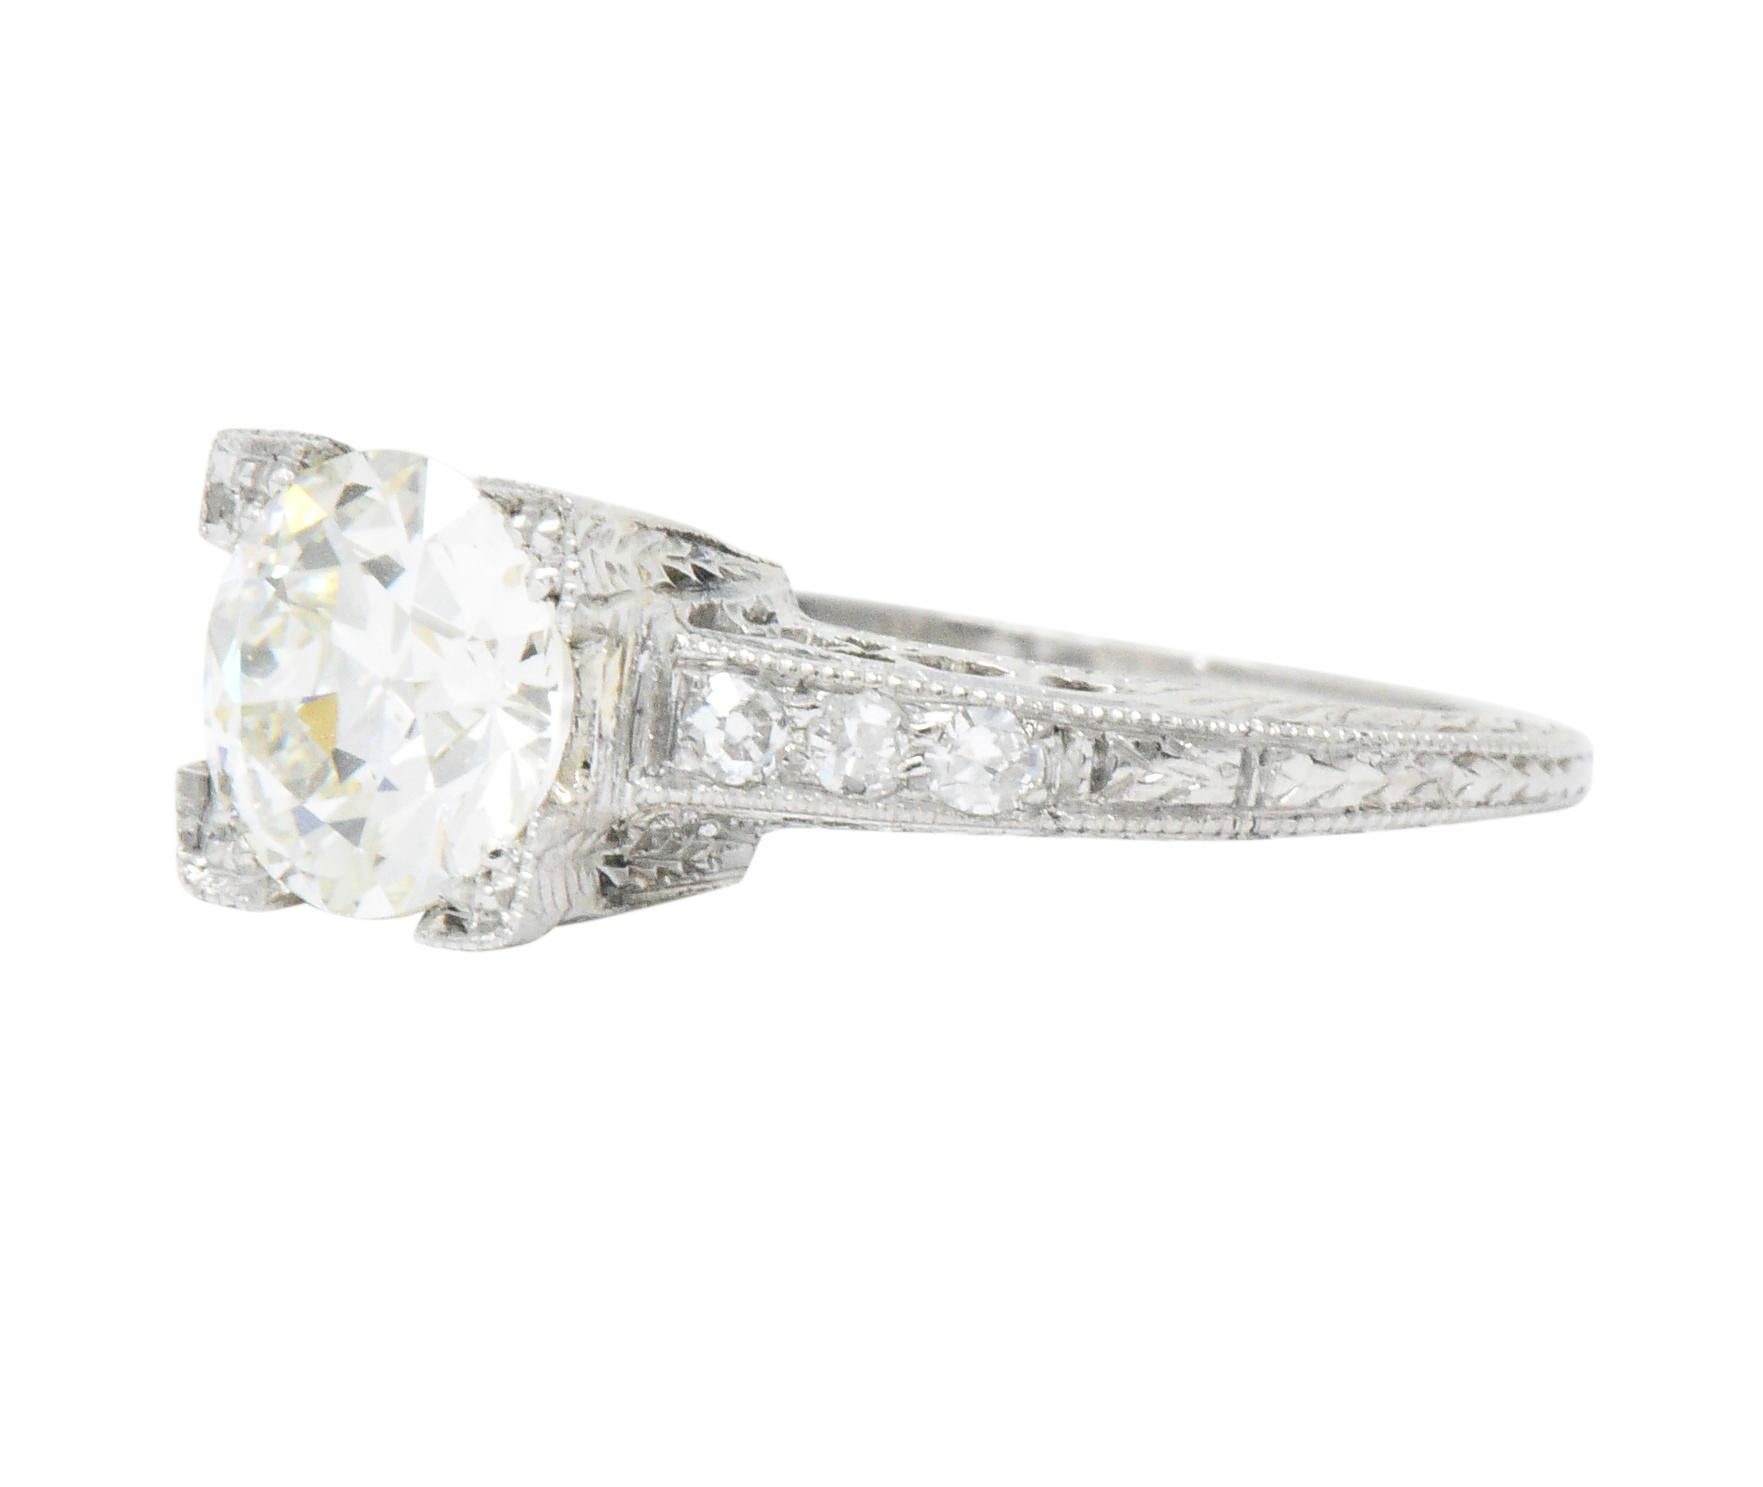 Centering a round brilliant cut diamond weighing 1.02 carats, K color with VS1 clarity

Flanked by bead set single cut diamonds weighing approximately 0.15 carat total; H/I color with VS to SI clarity

Featuring a square form head, milgrain detail,